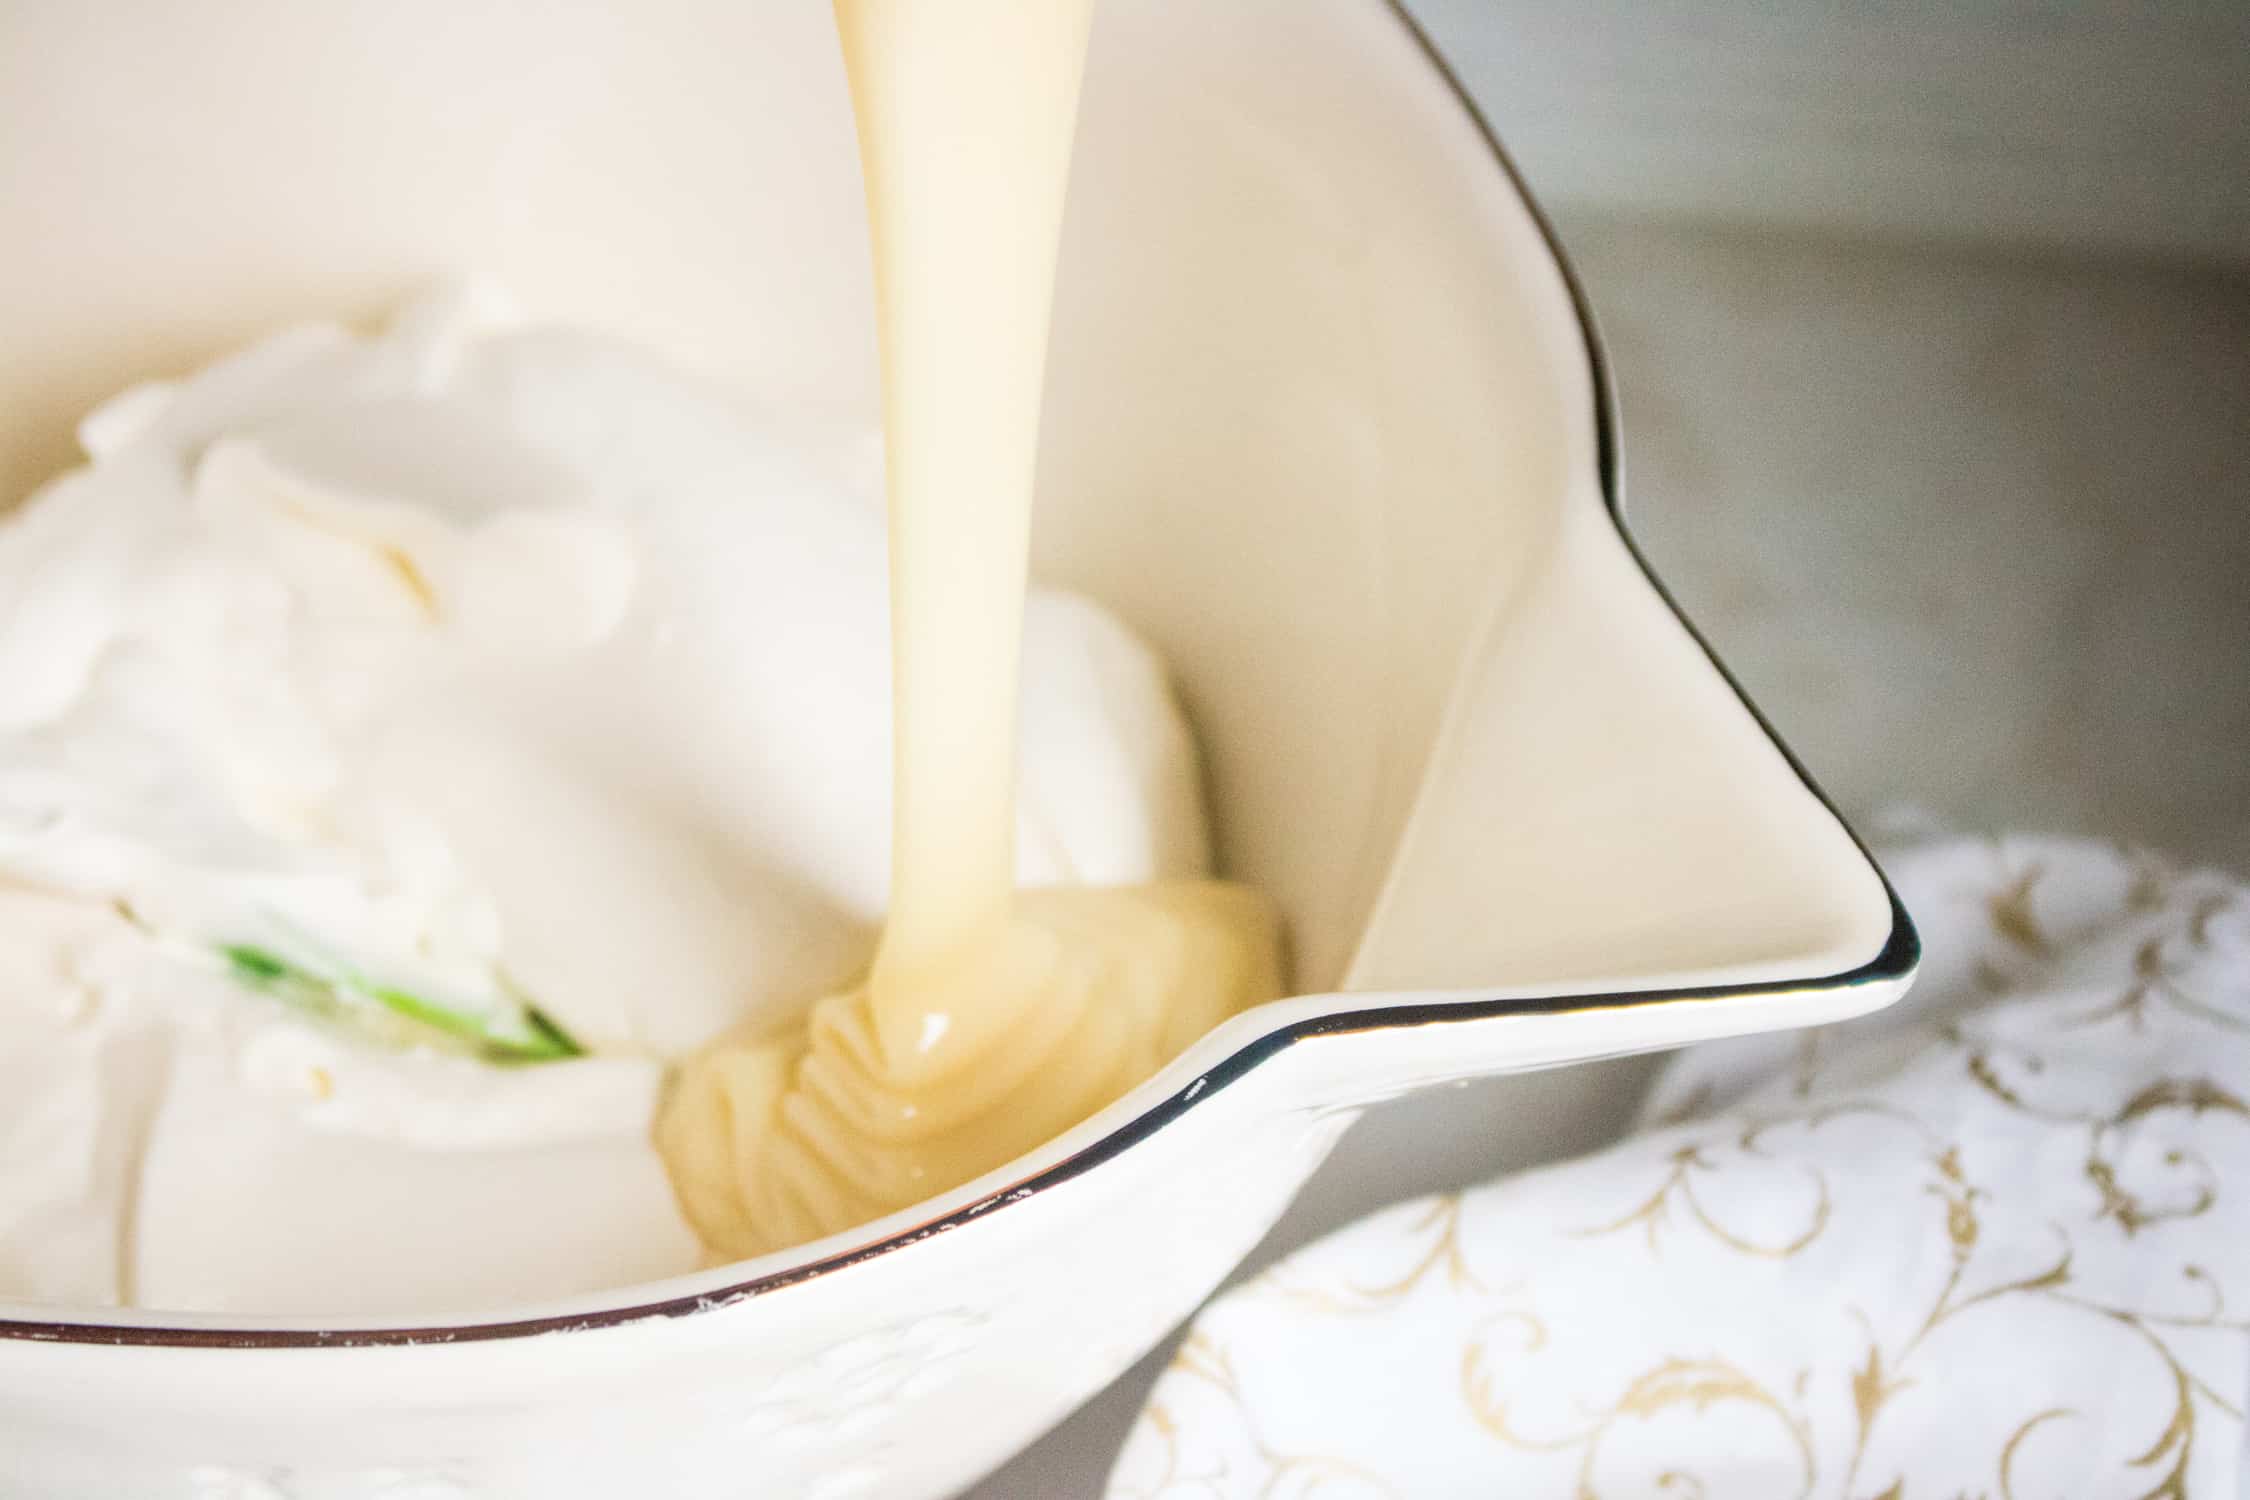 sweetened condensed milk being poured into a bowl of thick heavy whipping cream